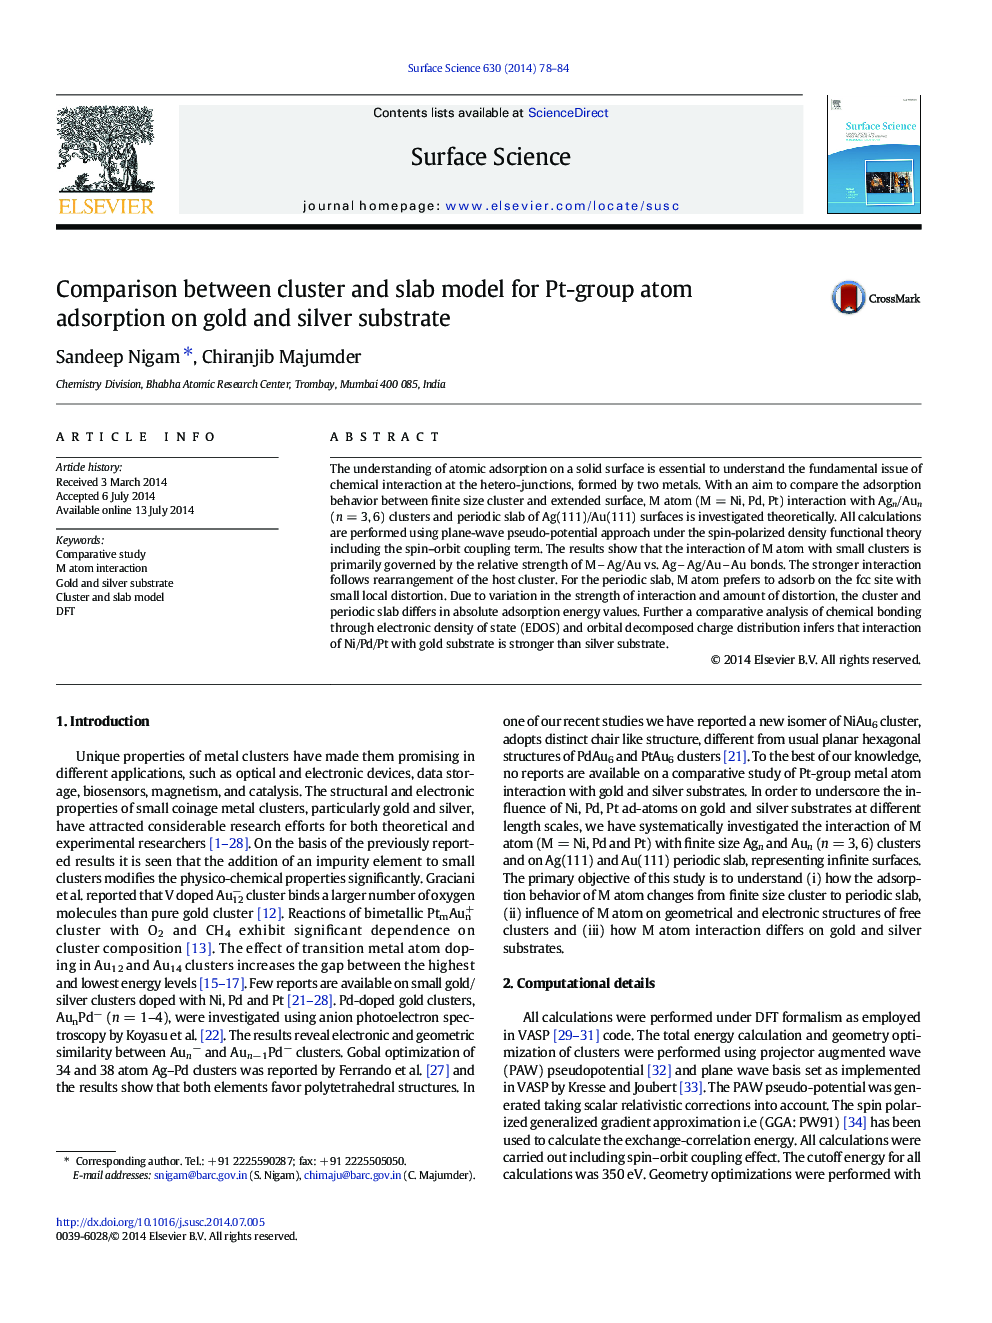 Comparison between cluster and slab model for Pt-group atom adsorption on gold and silver substrate